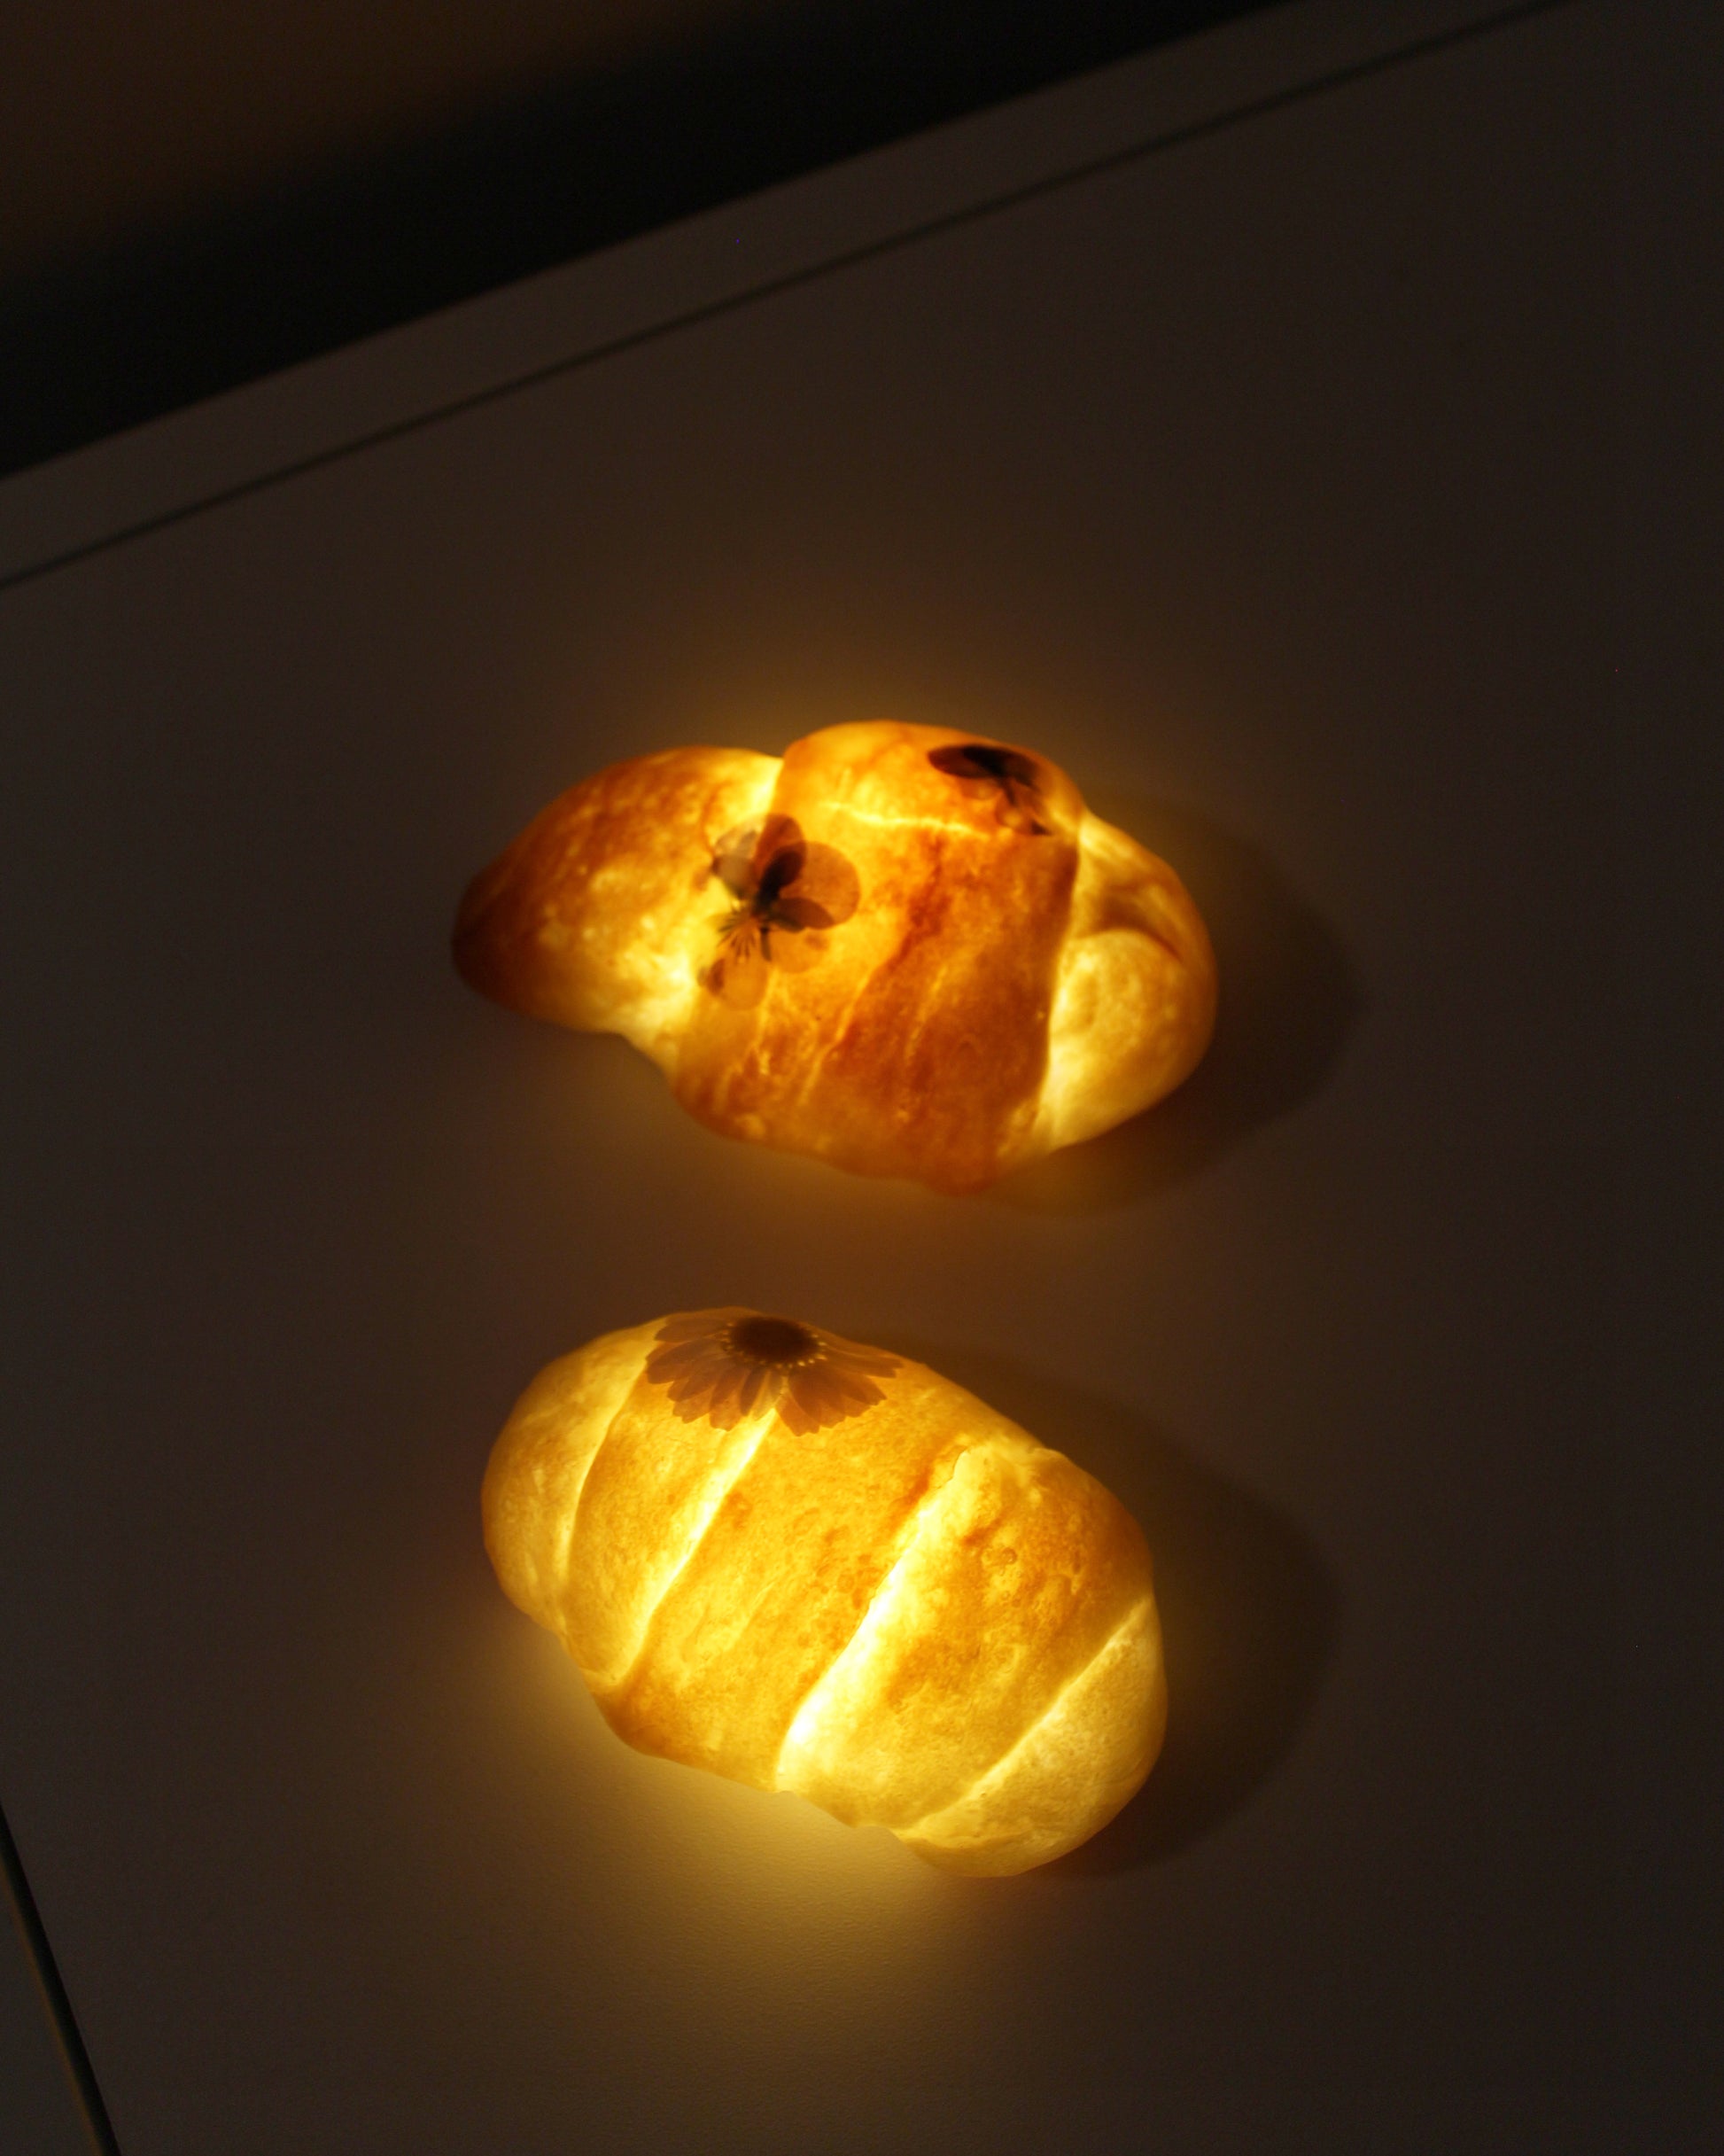 A mini bread roll lamp with daisies adorning it. Crafted from real, surplus bread that would otherwise be discarded-- baked, hollowed, and reimagined into a delightful lamp in Japan. Coated in an anti-bacterial and anti-fungal, eco-friendly resin.